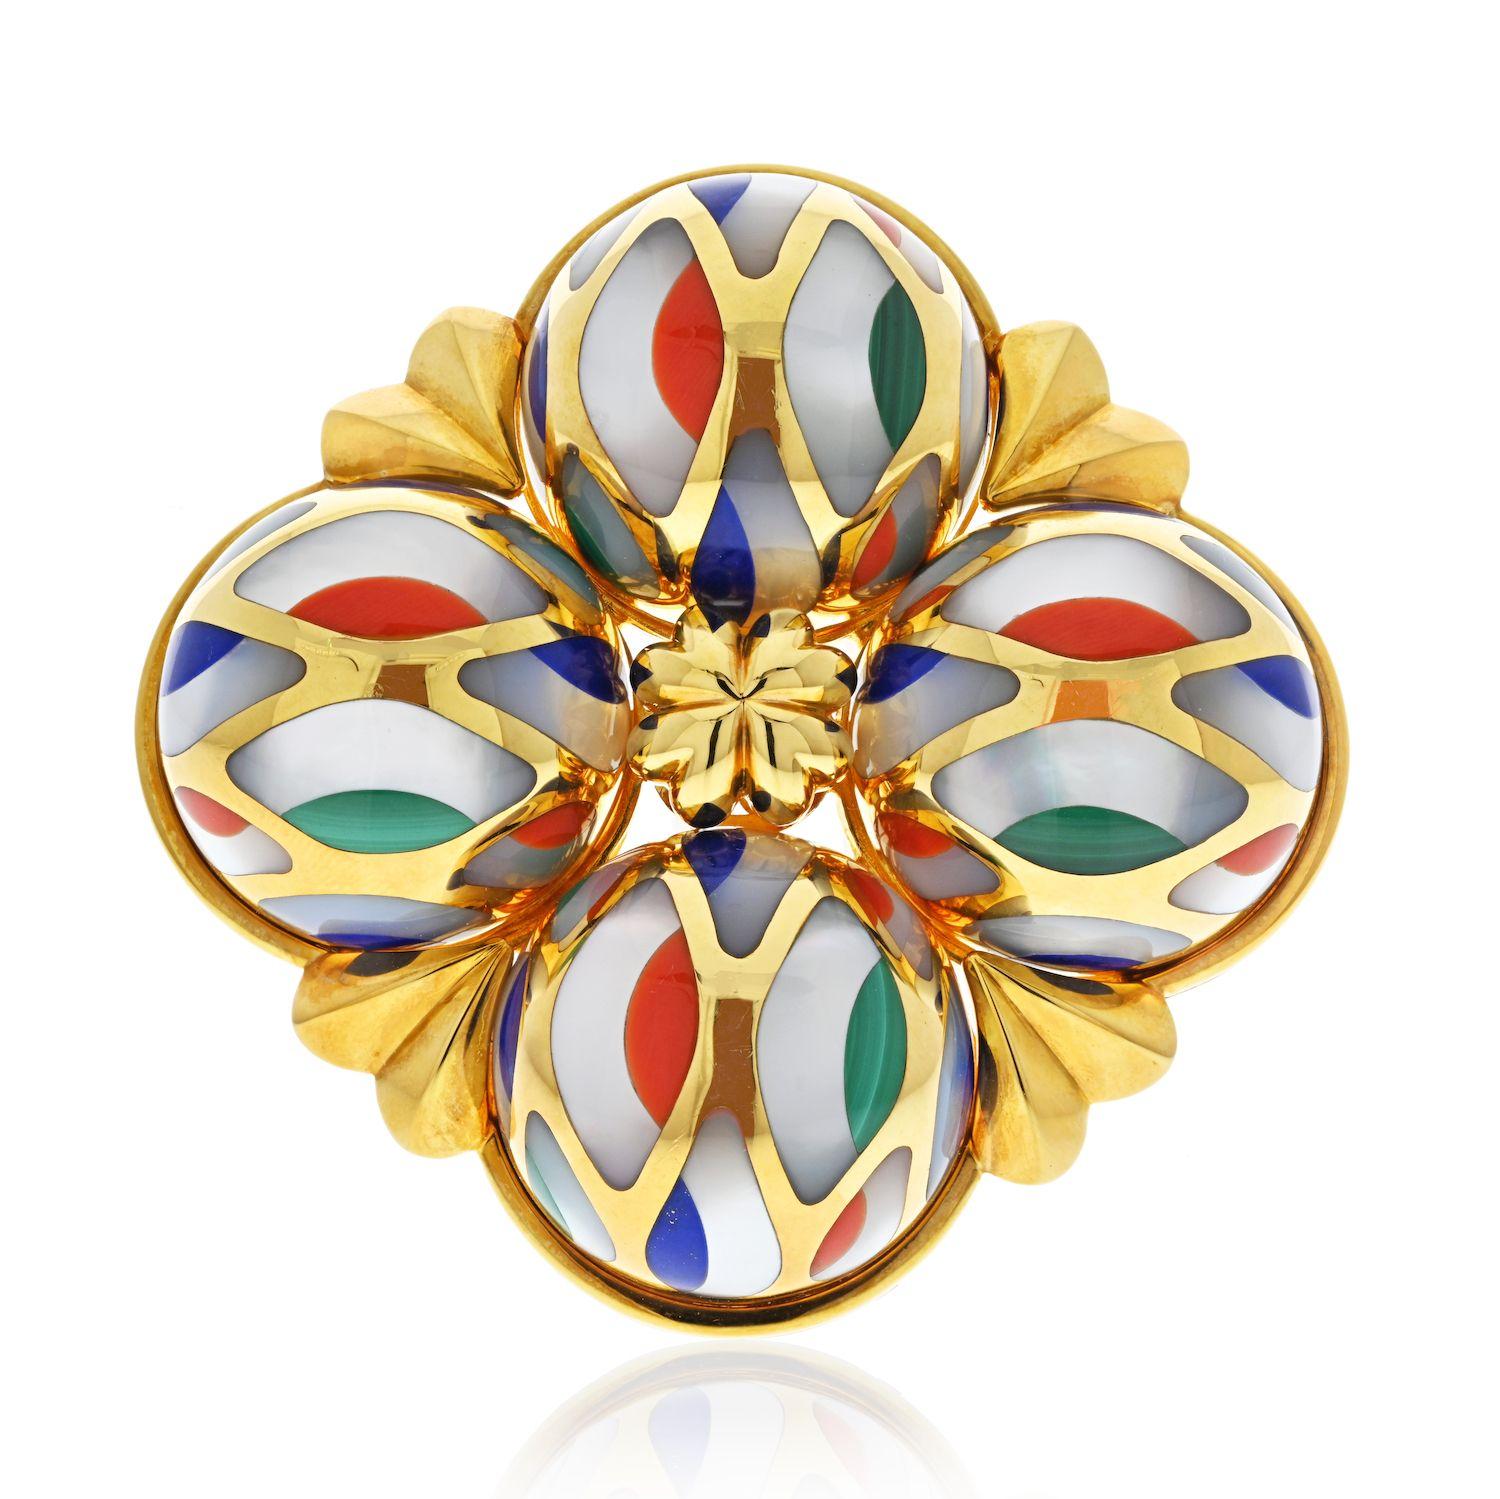 Very bright and colorful brooch by Asch Grossbradt, made in 18K Yellow with a bubble like design accented with bright multi-color enamel. 
Mother-of-pearl, coral, lapis lazuli, and malachite plaques, 18k yellow gold, signed Asch